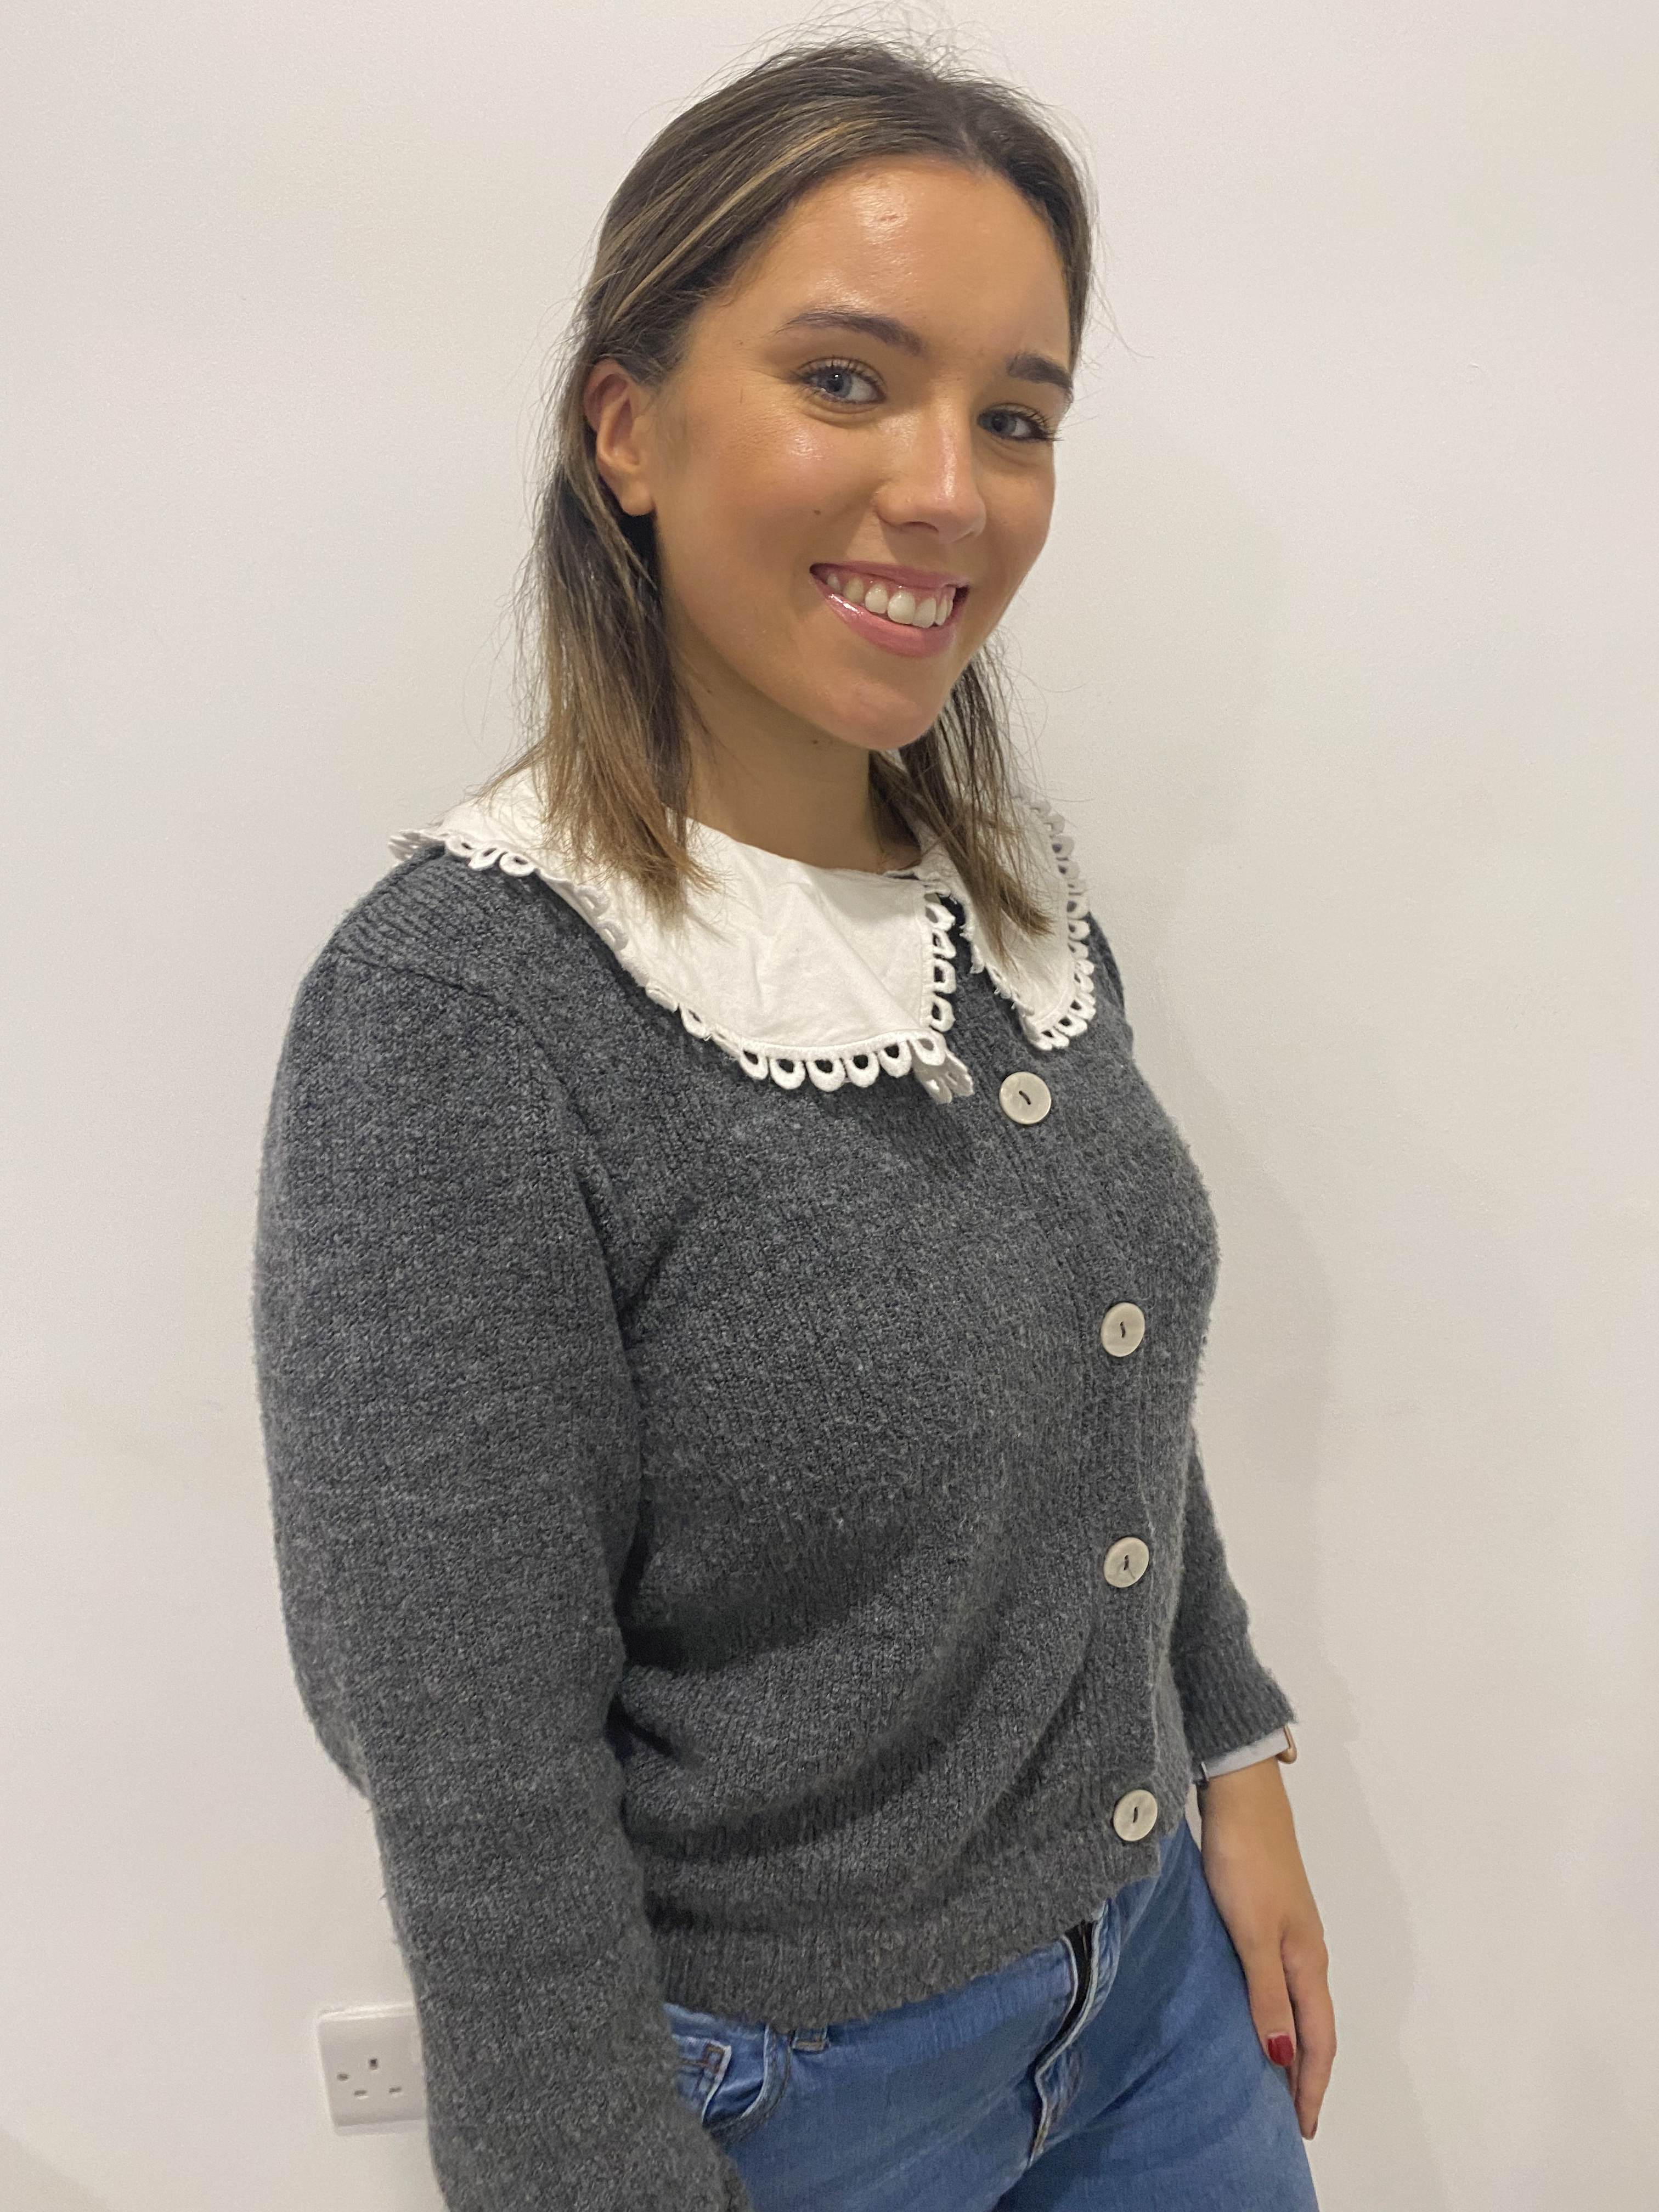 The image shows Amy Sweeney, a family support worker with Enable Ireland, standing and smiling. Amy is dressed in a grey cardigan with blue jeans. 